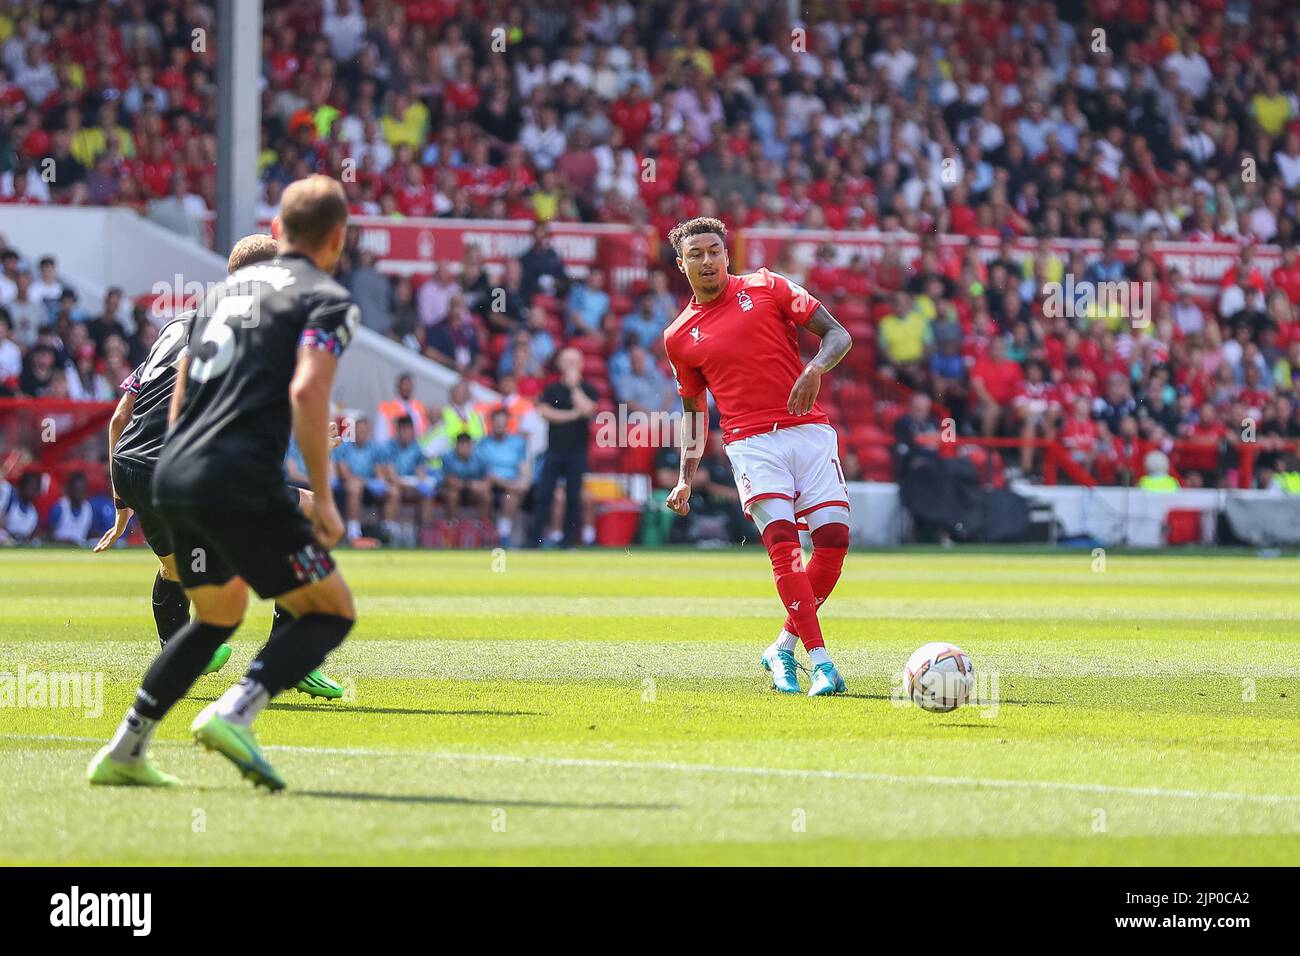 Jesse Lingard #11 of Nottingham Forest passes the ball Stock Photo